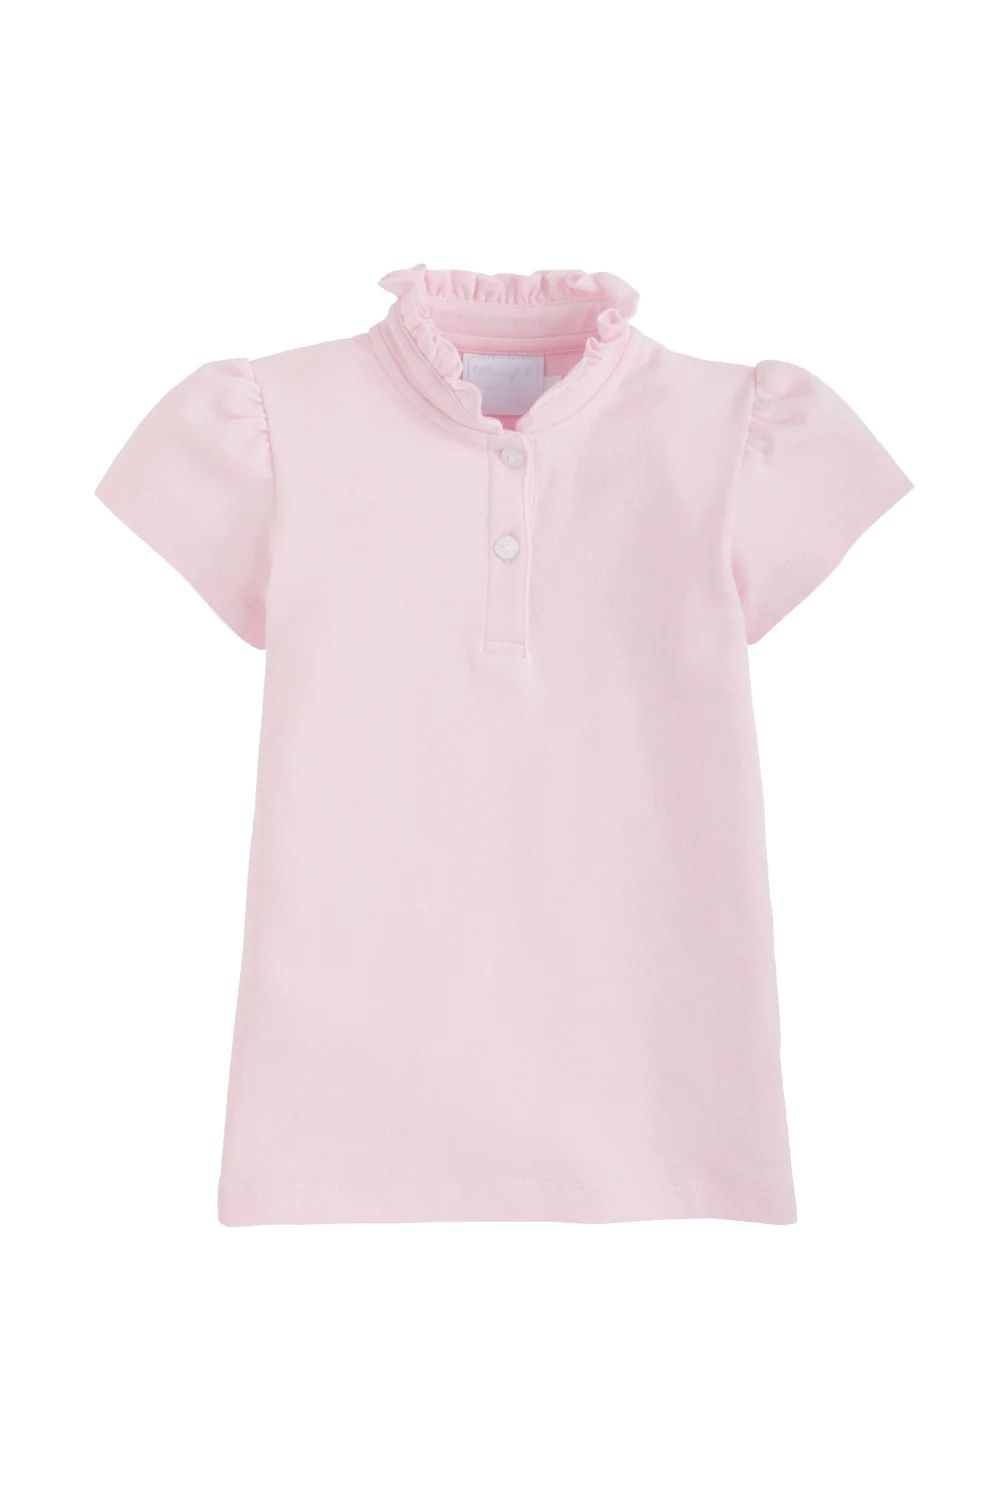 Hastings Polo - Light Pink | Little English